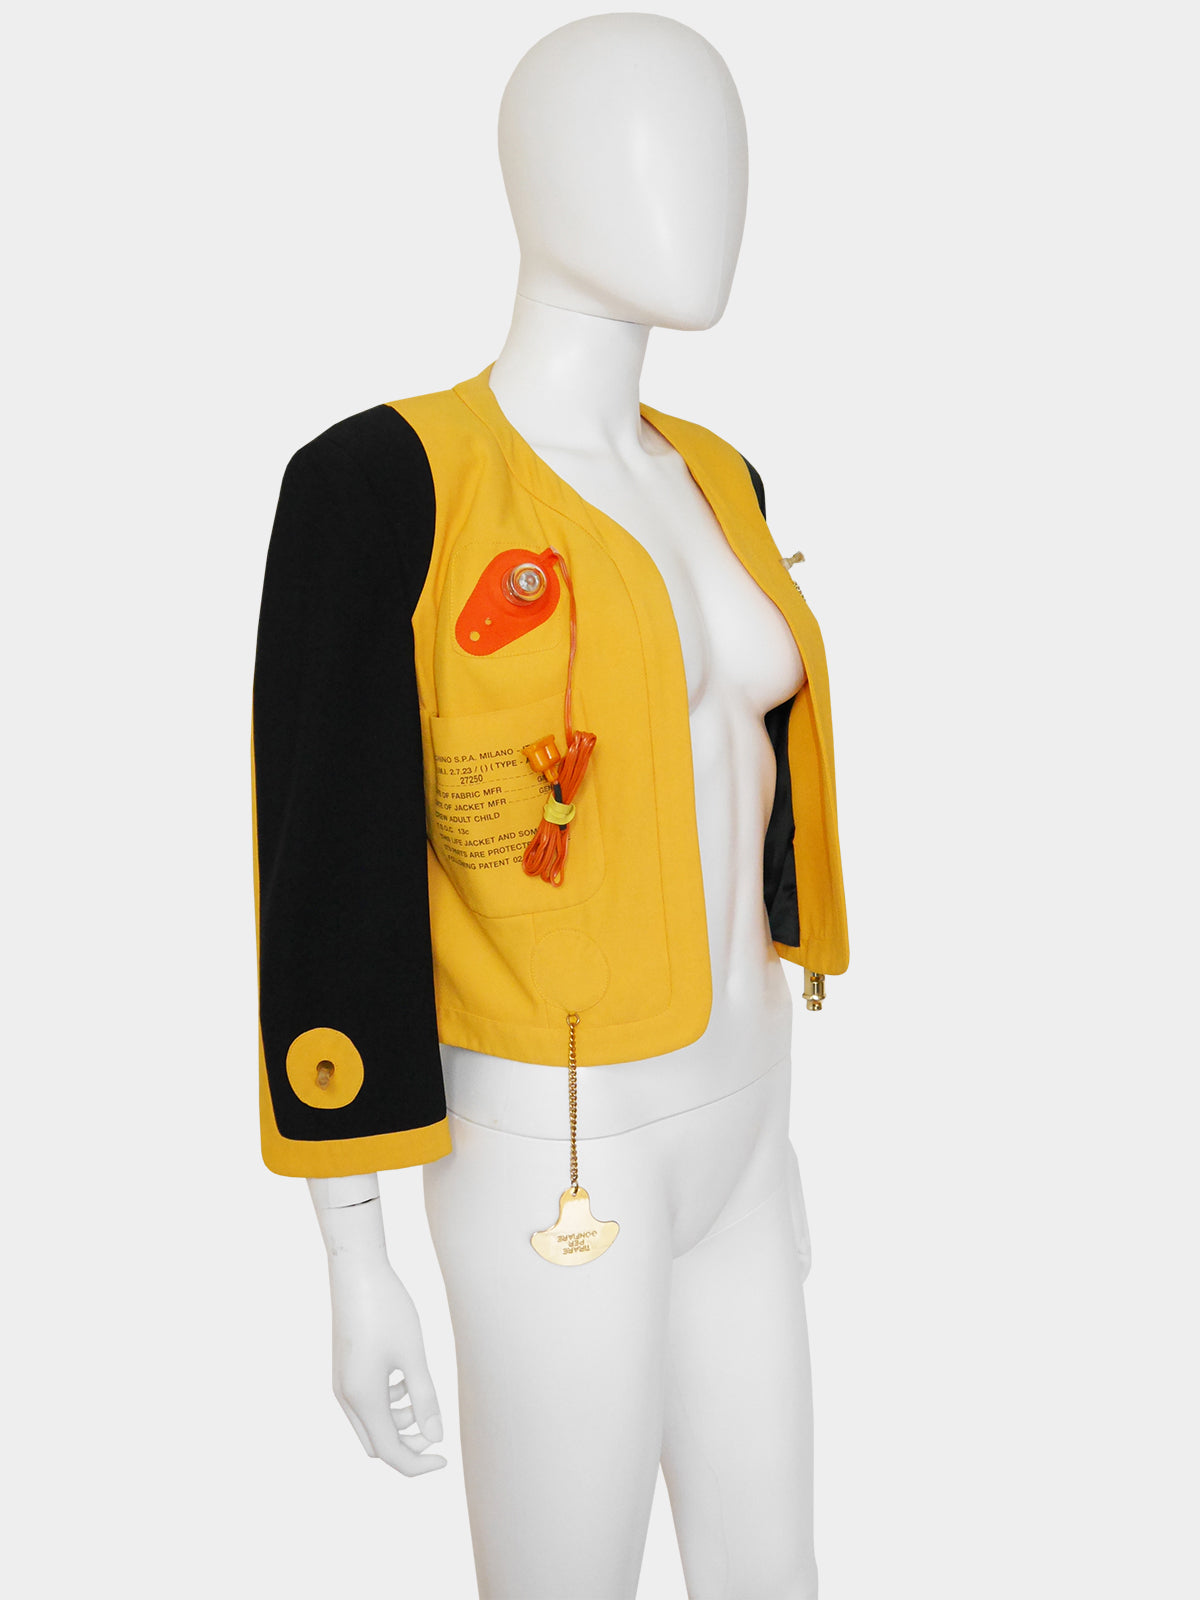 MOSCHINO Couture! Spring 1991 Lifesaver Jacket Size M